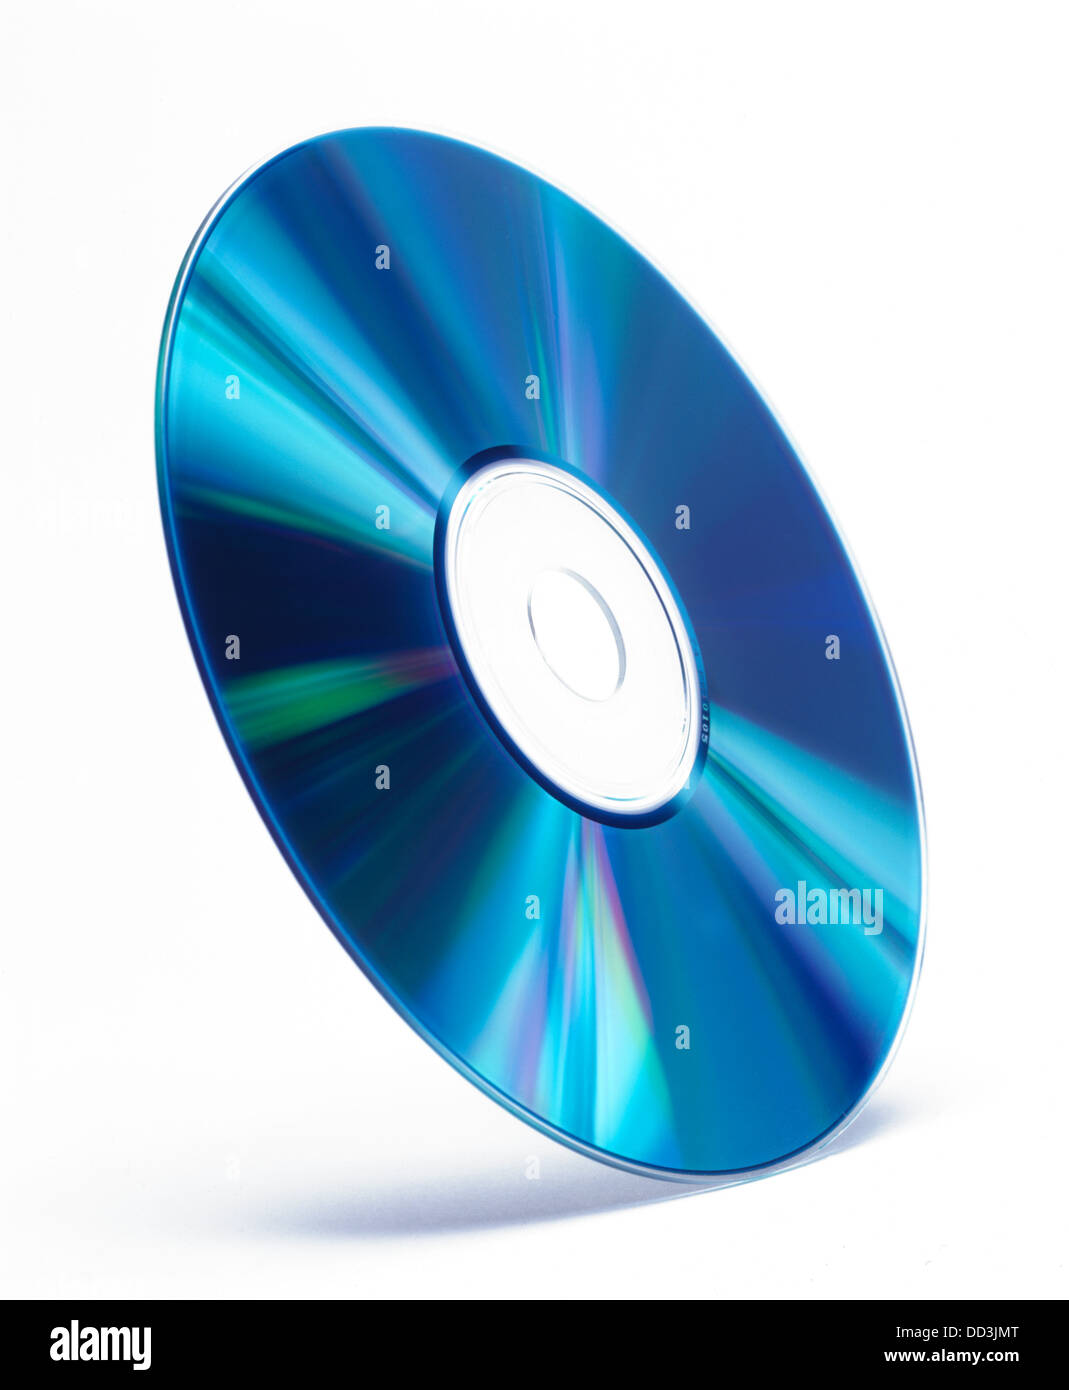 A compact disc standing on a white background. Stock Photo